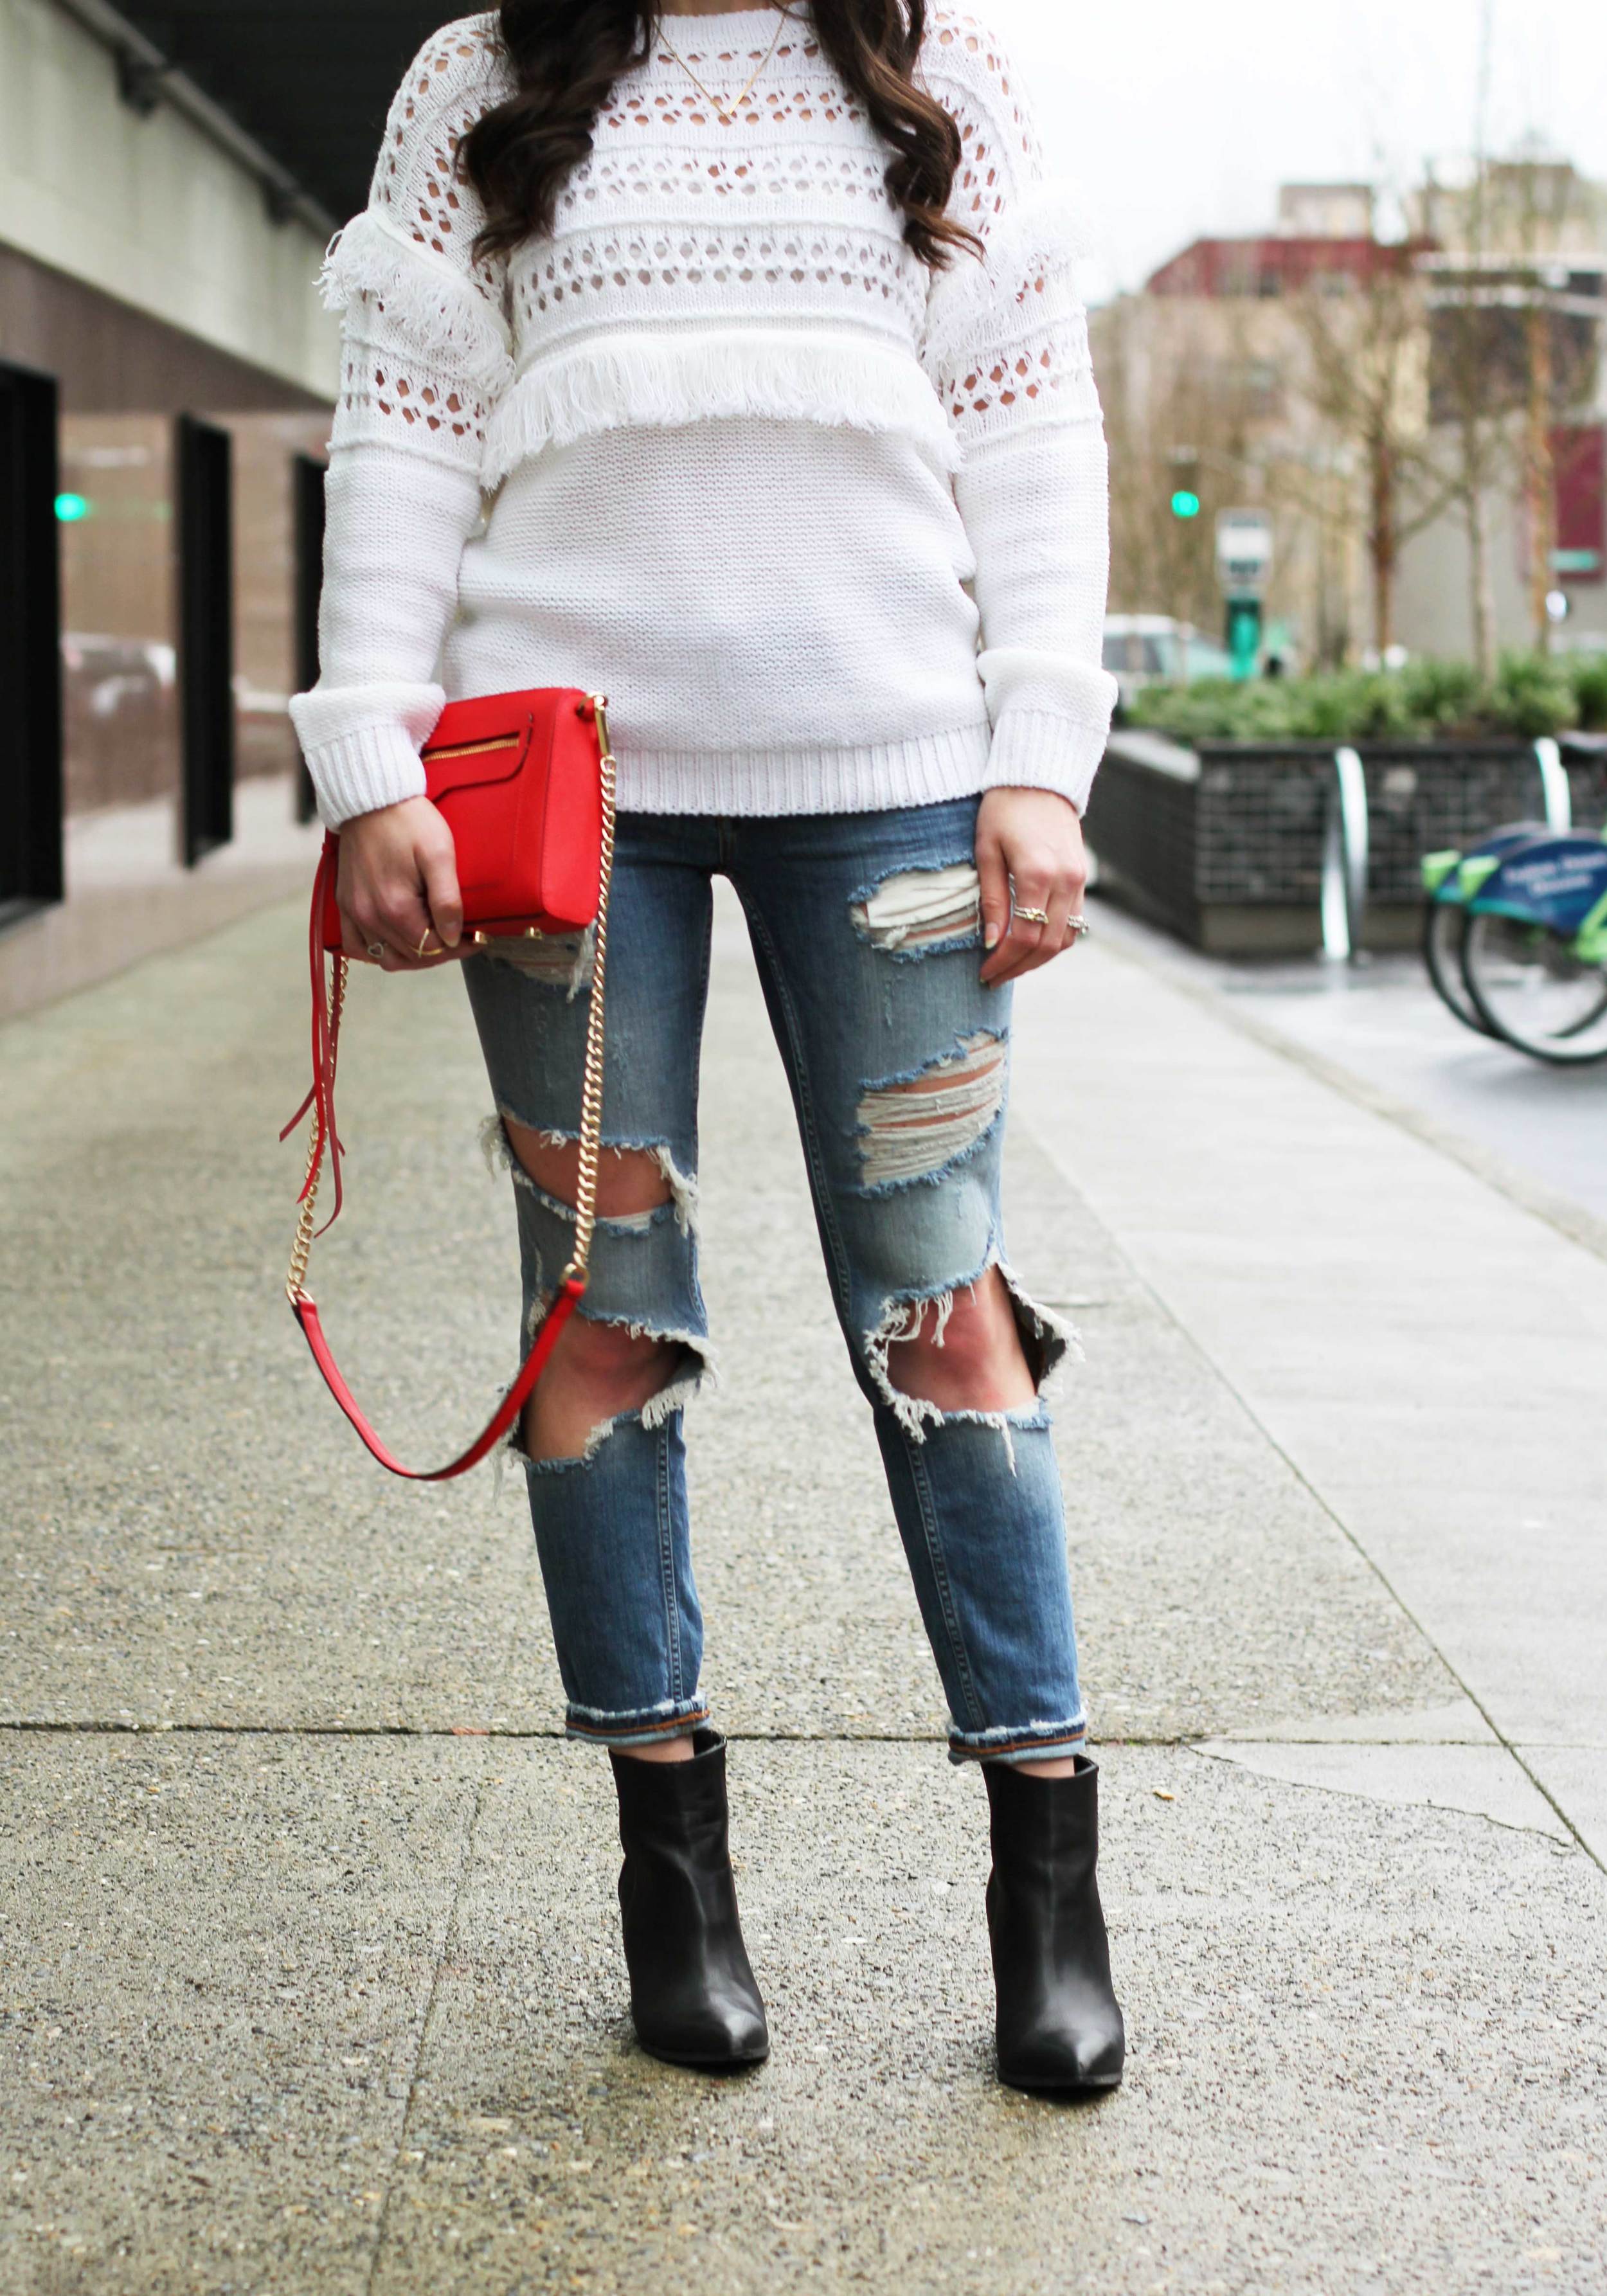 Winter Outfit, JOA Openwork Pullover Fringe Sweater, Destroyed Skinny Jeans, Seychelles 'Accordian' Booties, Brixton Mayfield II Hat, Dior Look Alike Sunglasses, Red Rebecca Minkoff 'Avery' Crossbody